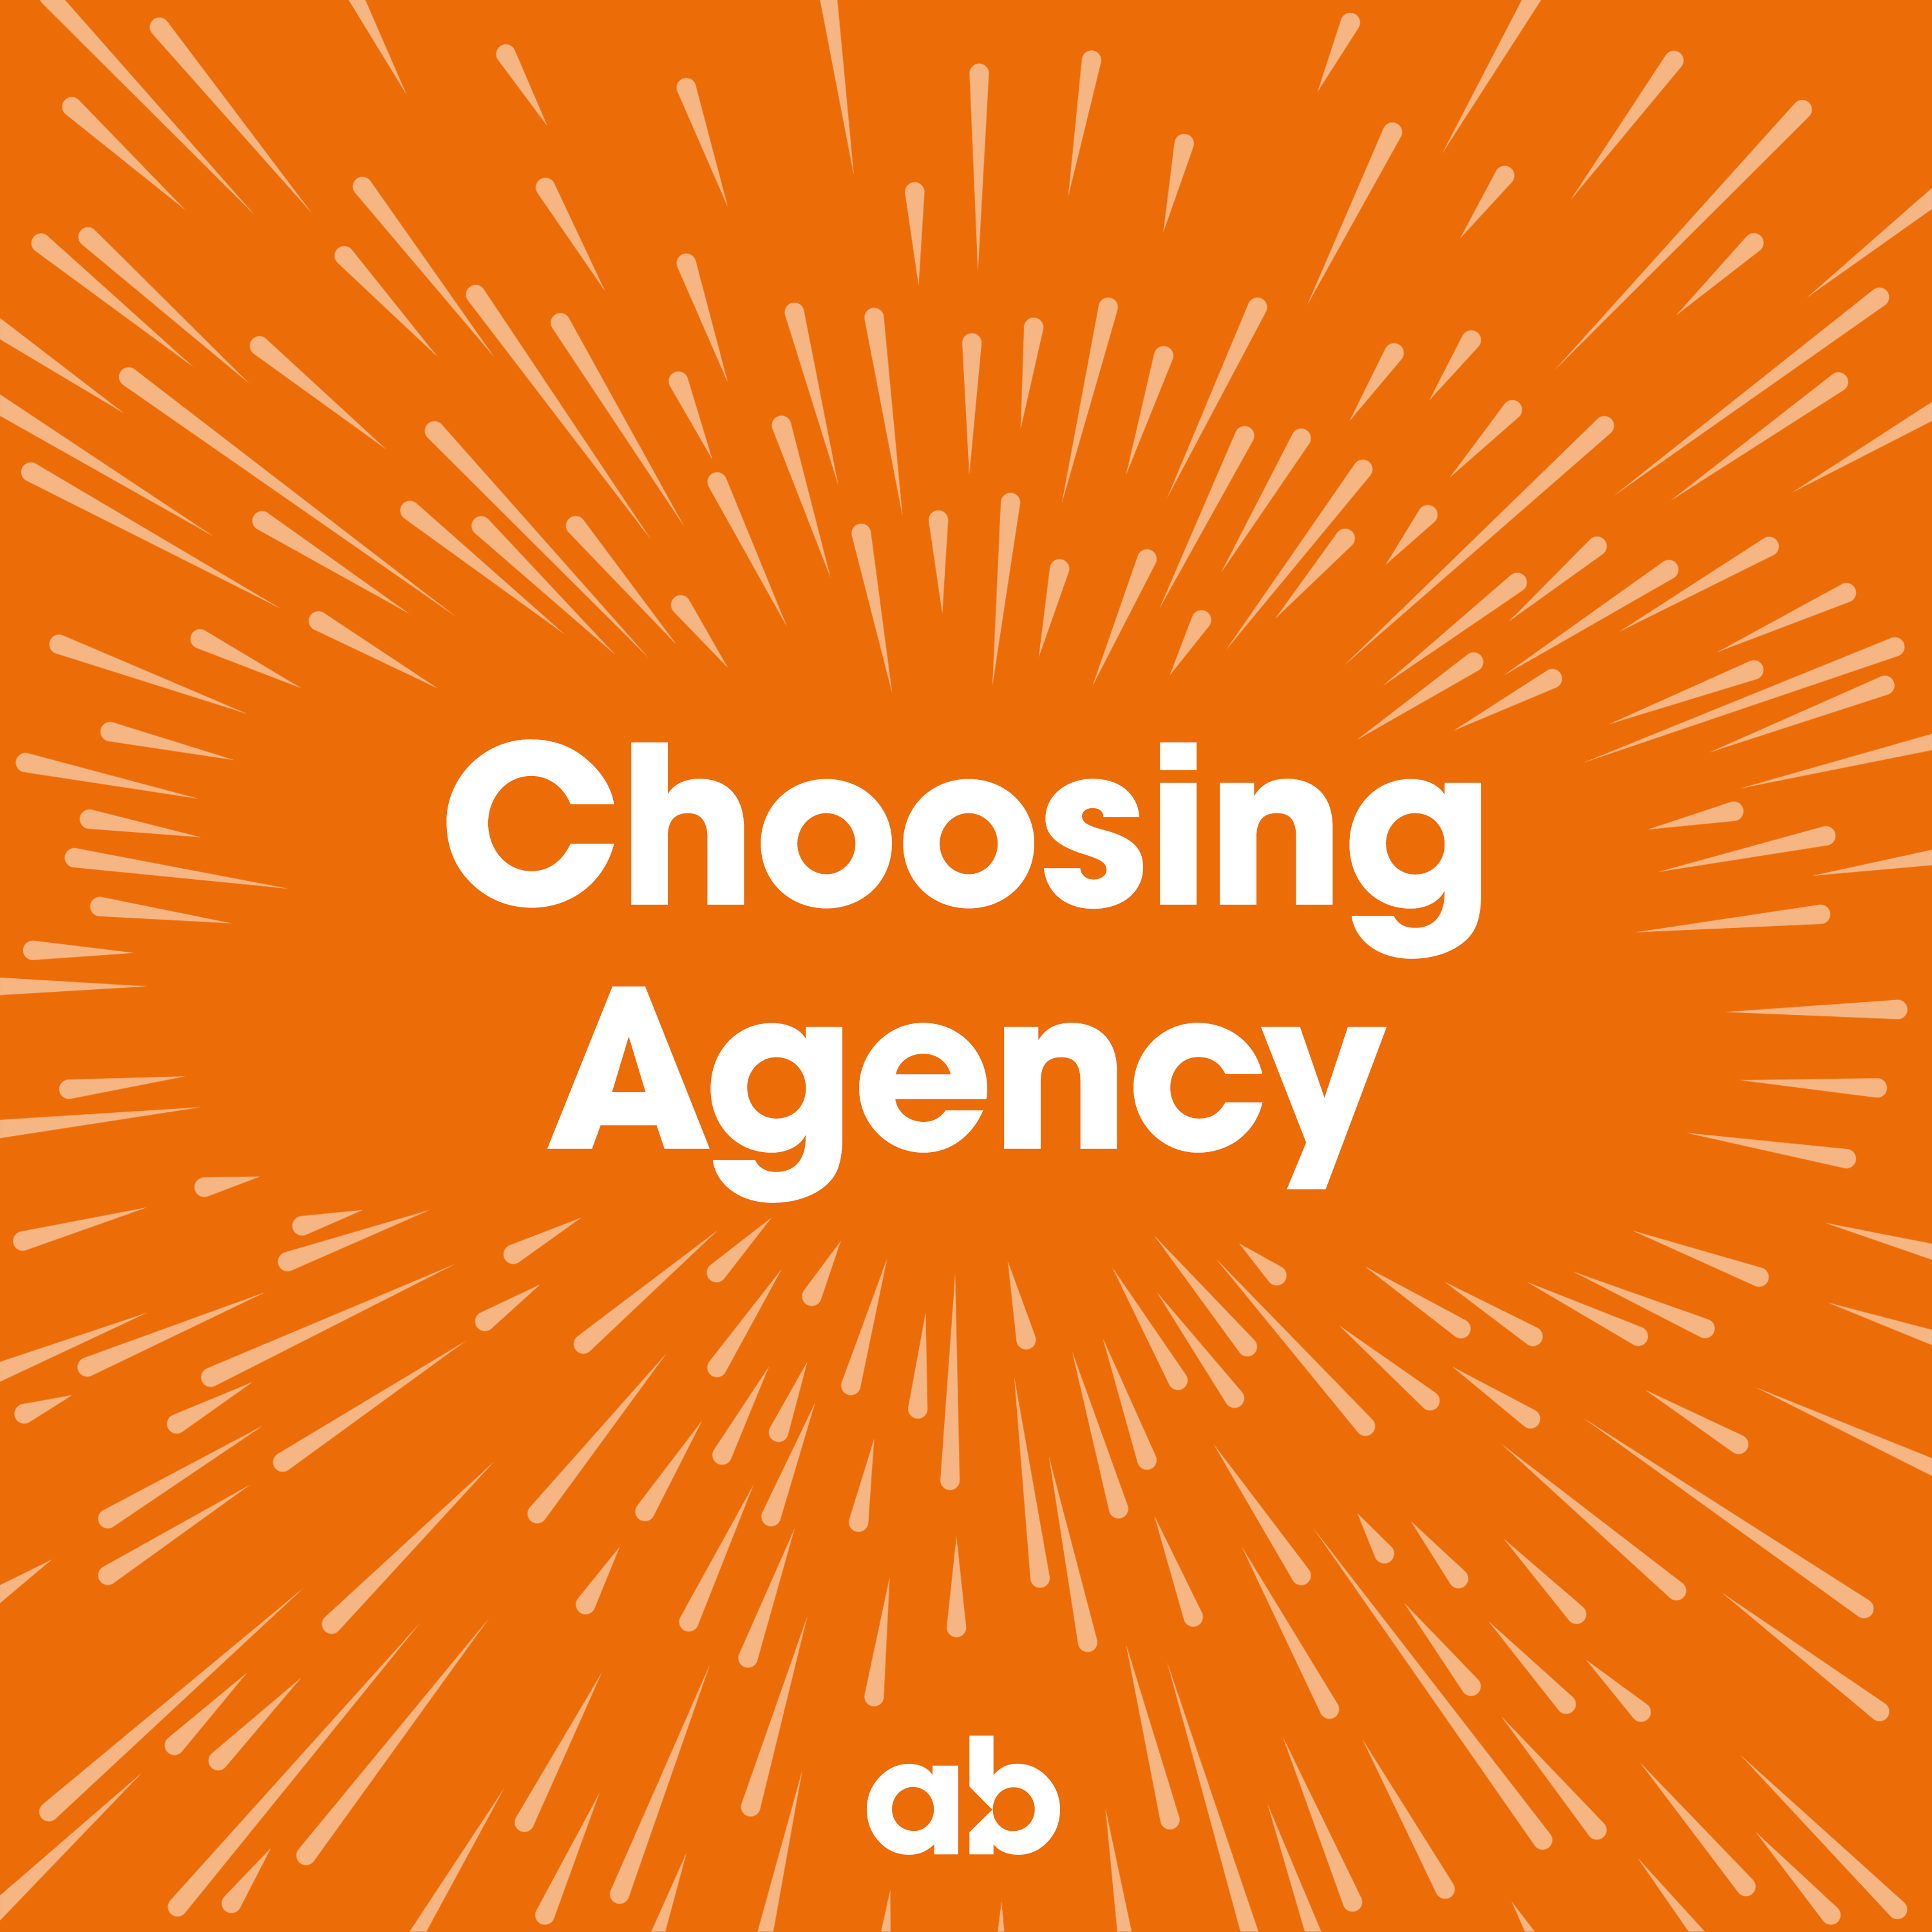 Ep7. From "being a victim" to "choosing agency" - with Jo Corbishley